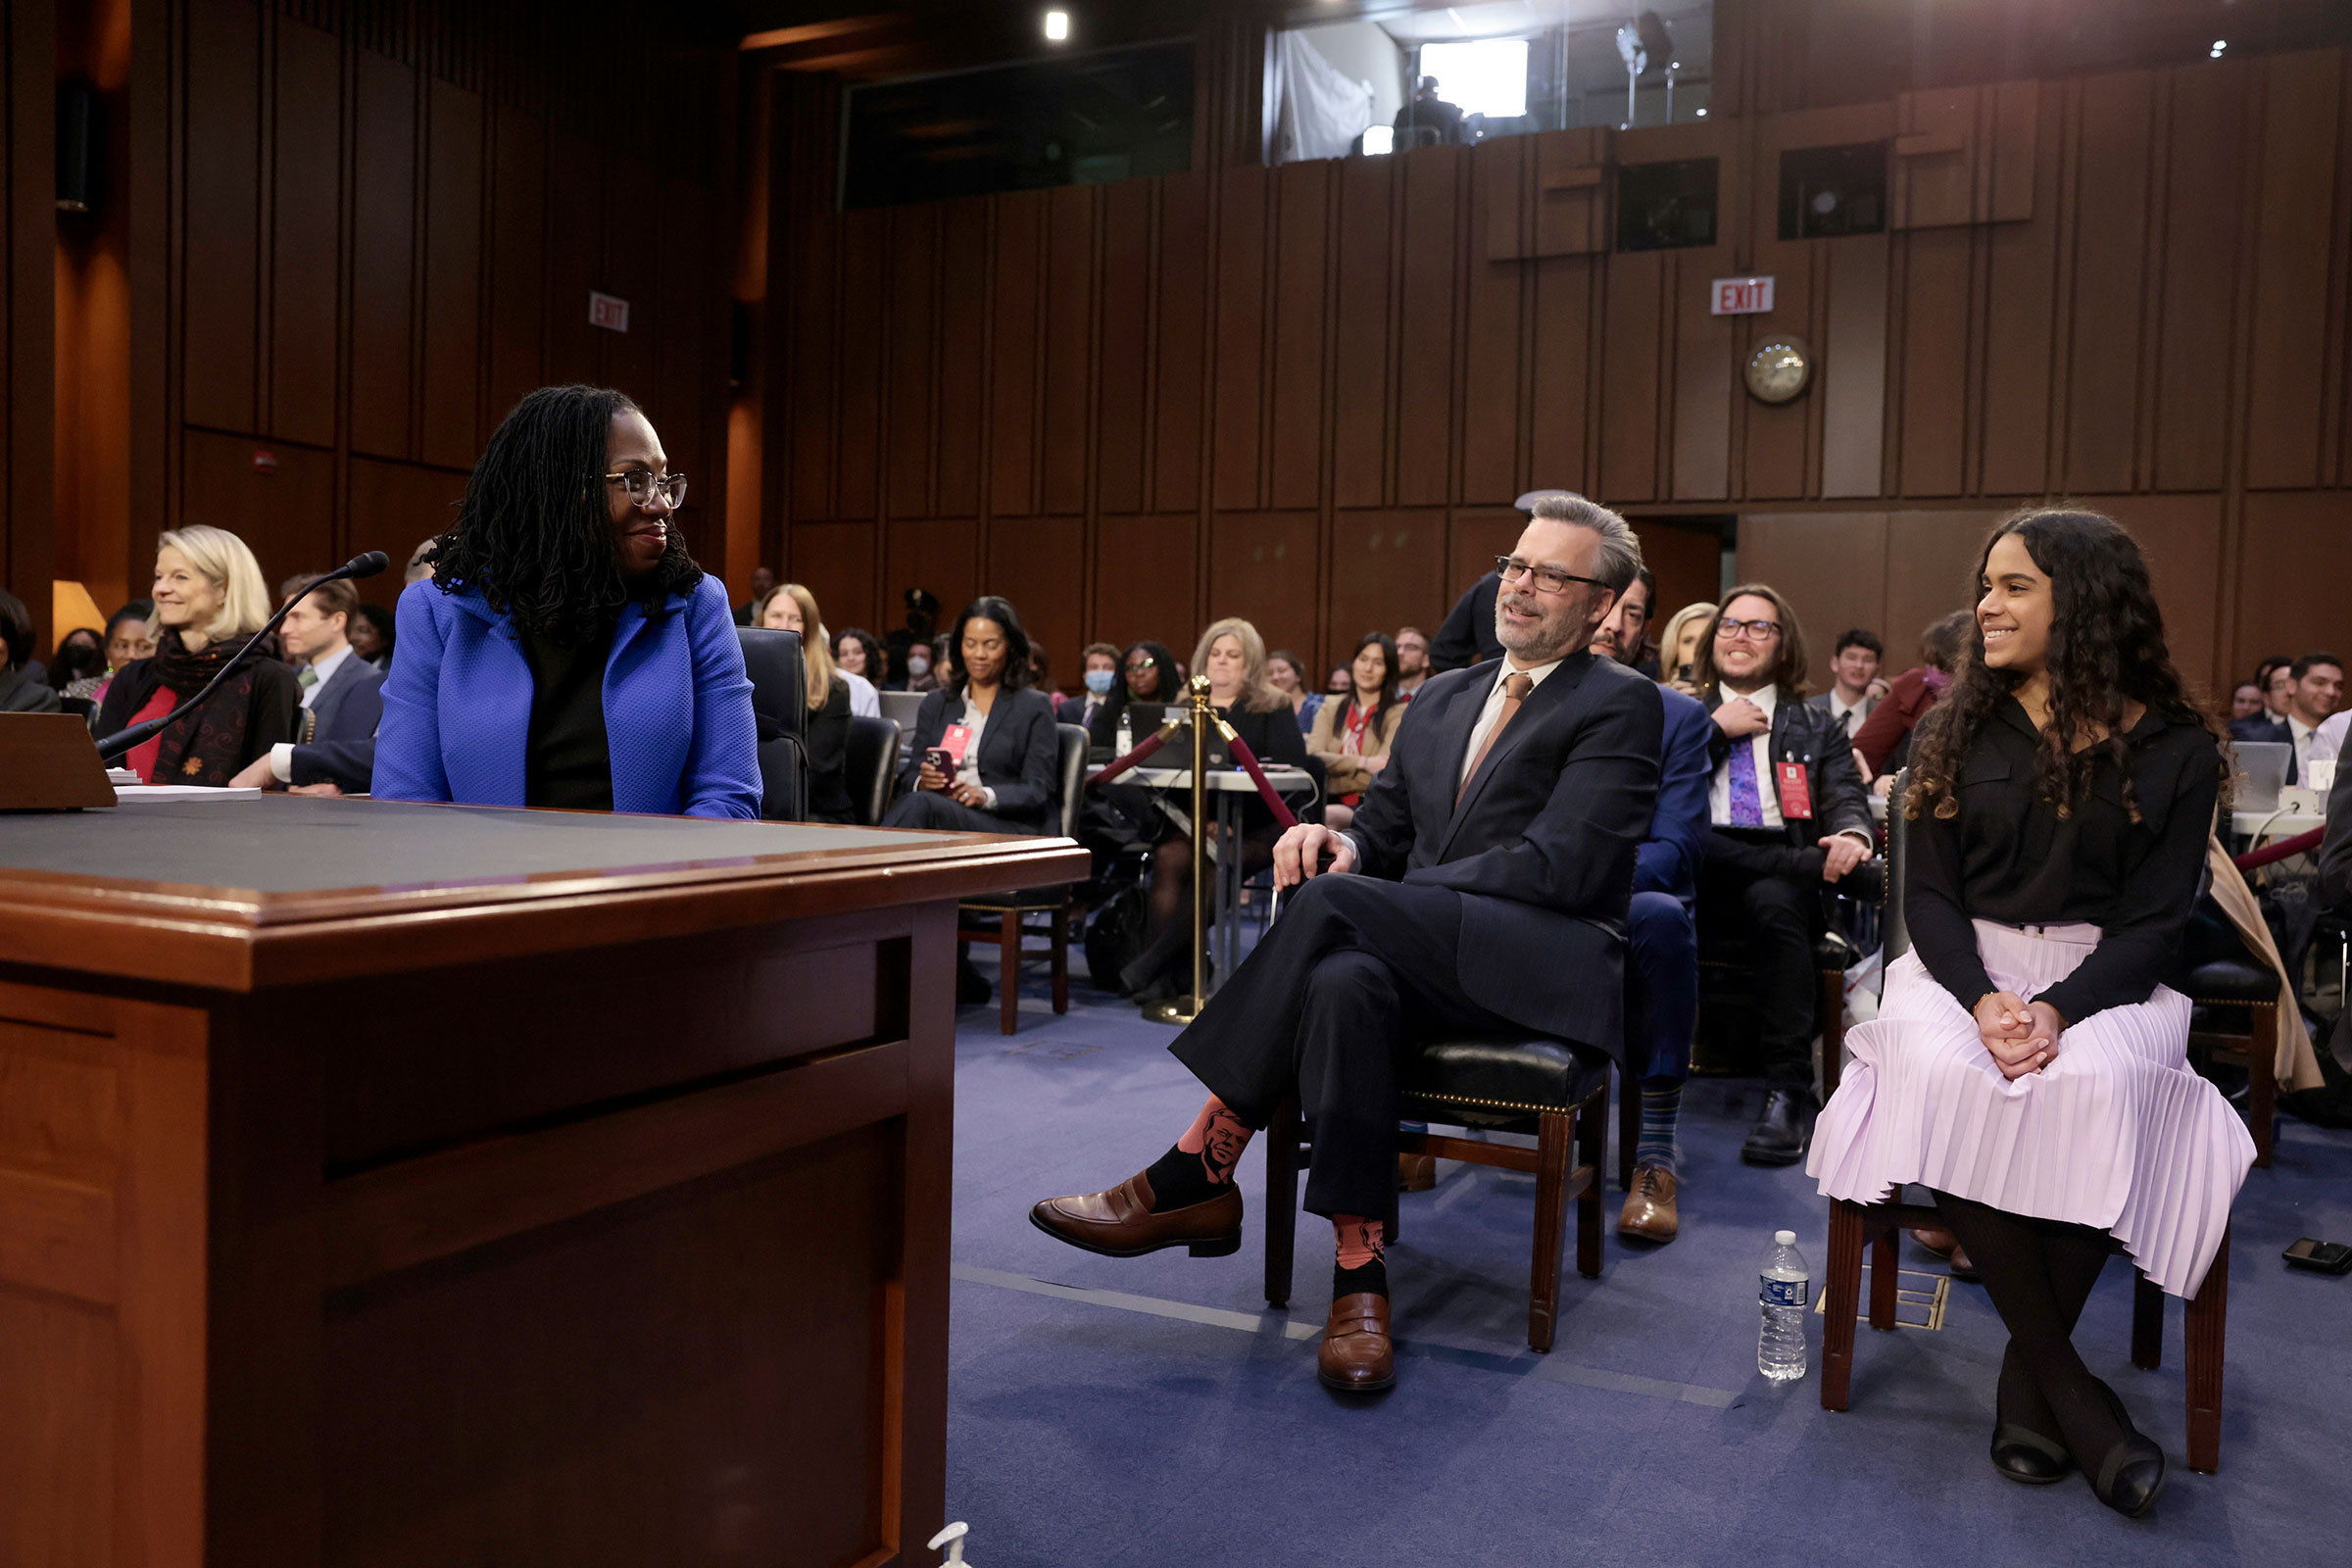 Judge Ketanji Brown Jackson's husband, Patrick Jackson, and daughter, Leila Jackson, smiling while seated behind her at the close of Jackson's third day of confirmation hearings on March 23. (Anna Moneymaker—Getty Images)